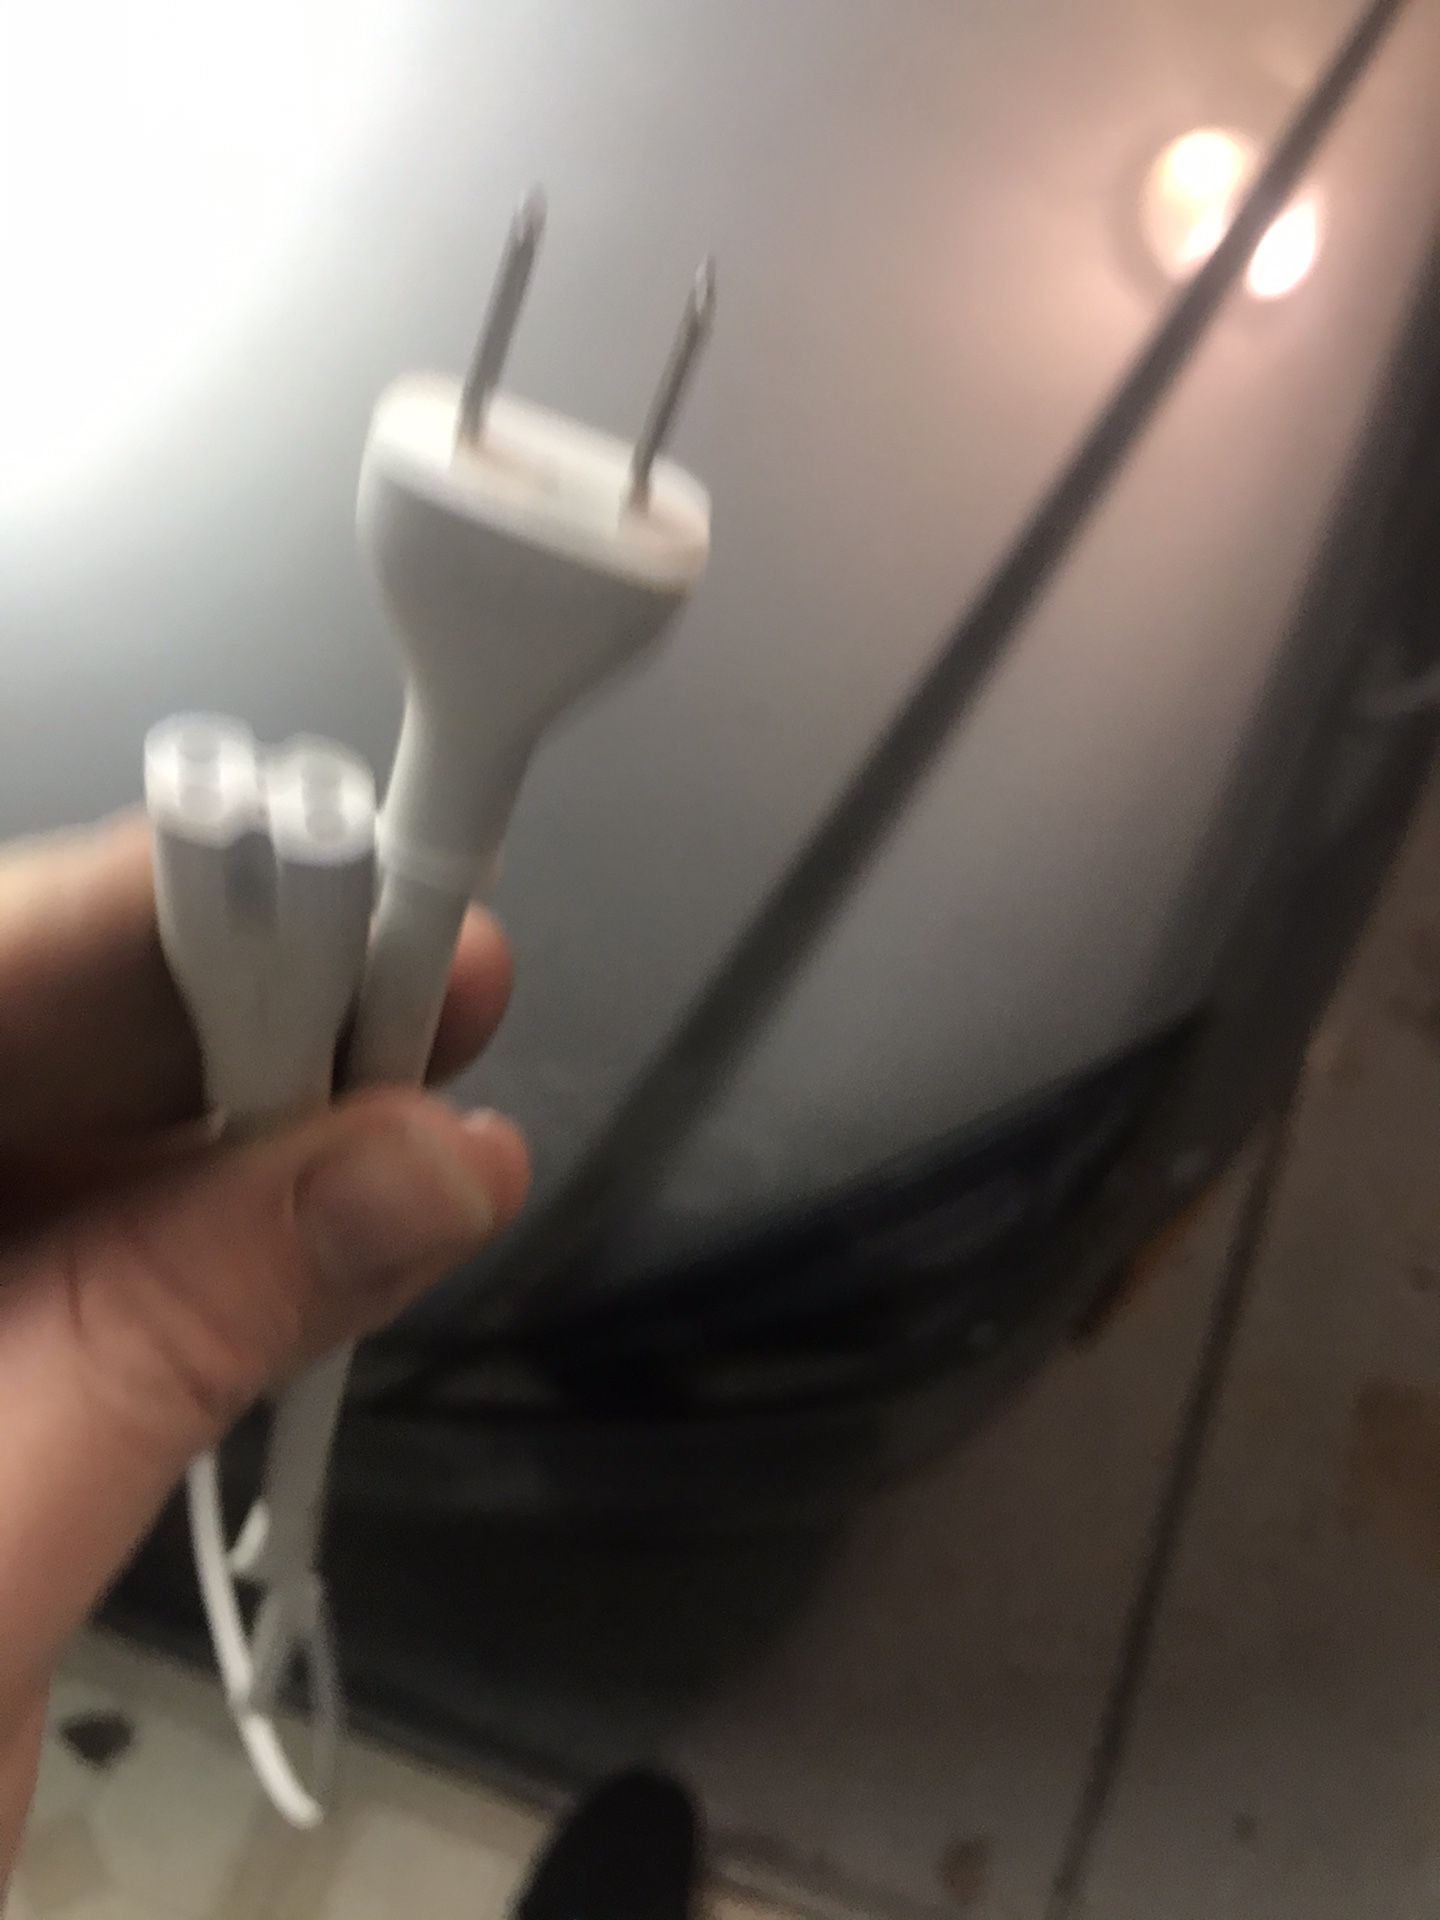 Apple TV cable